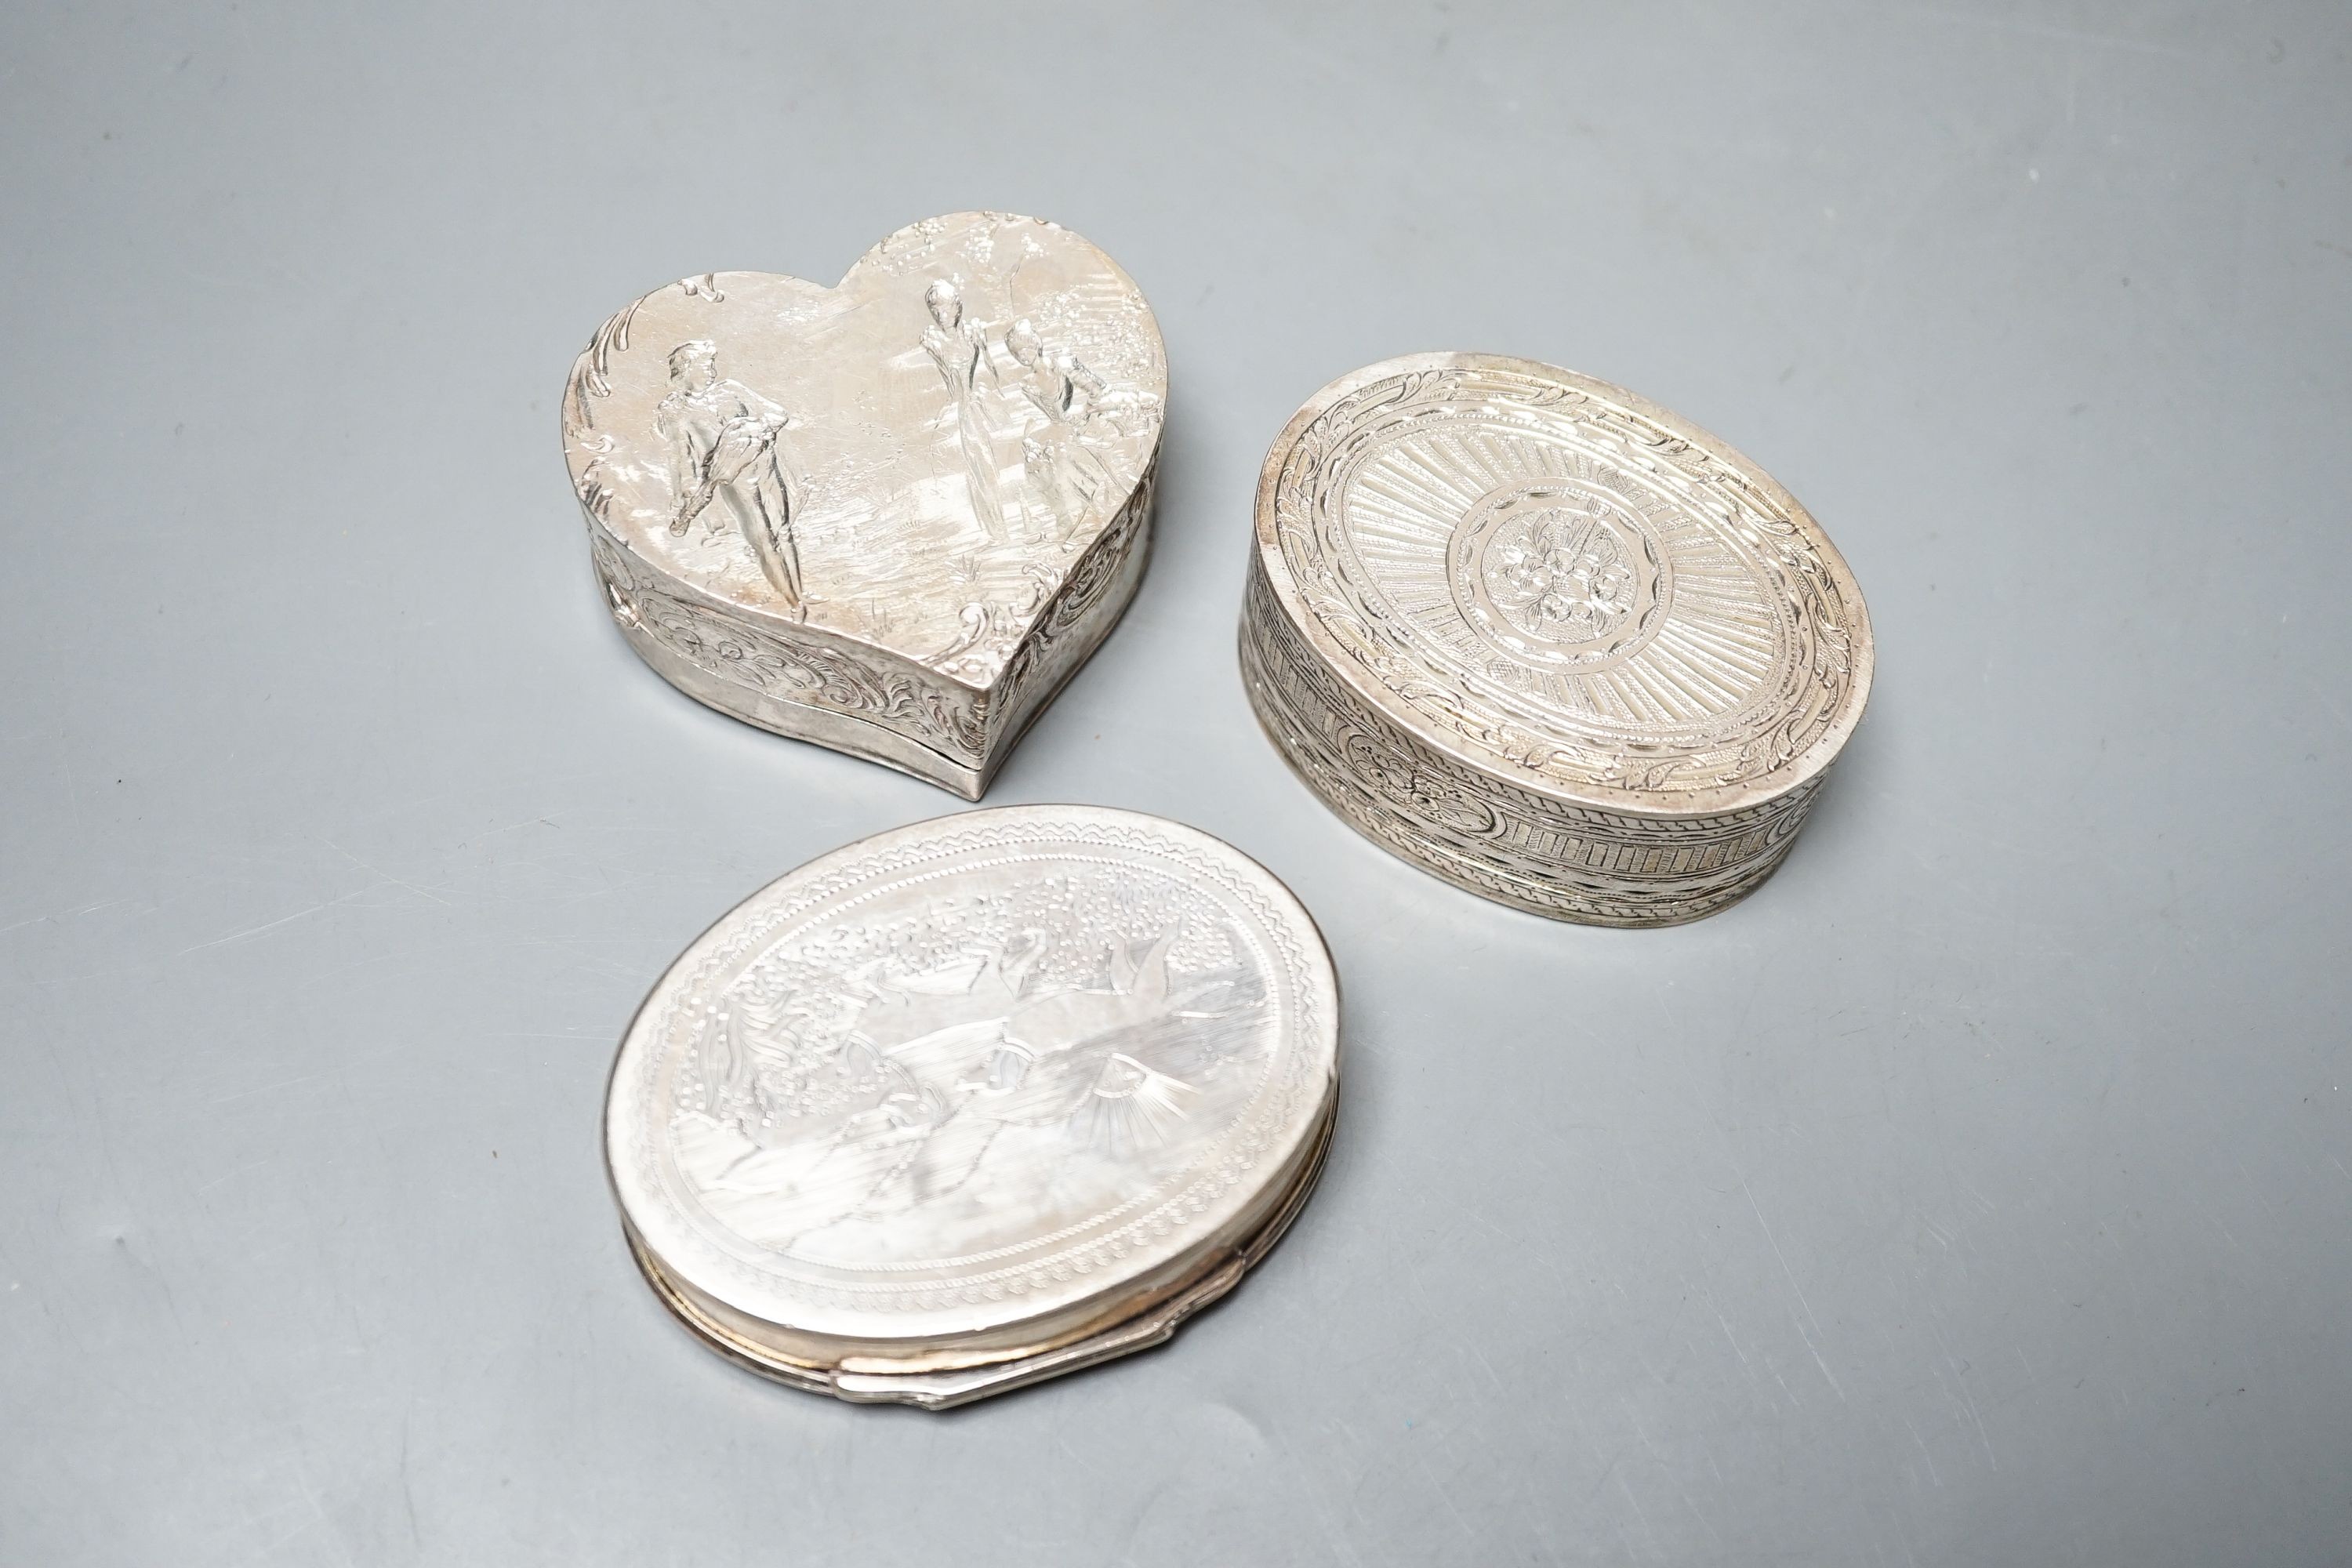 A continental oval white metal snuff box, engraved with hunting scenes, 72mm, a silver oval snuff box with Sheffield, import marks, a silver heart shaped box and a silver cigarette box.